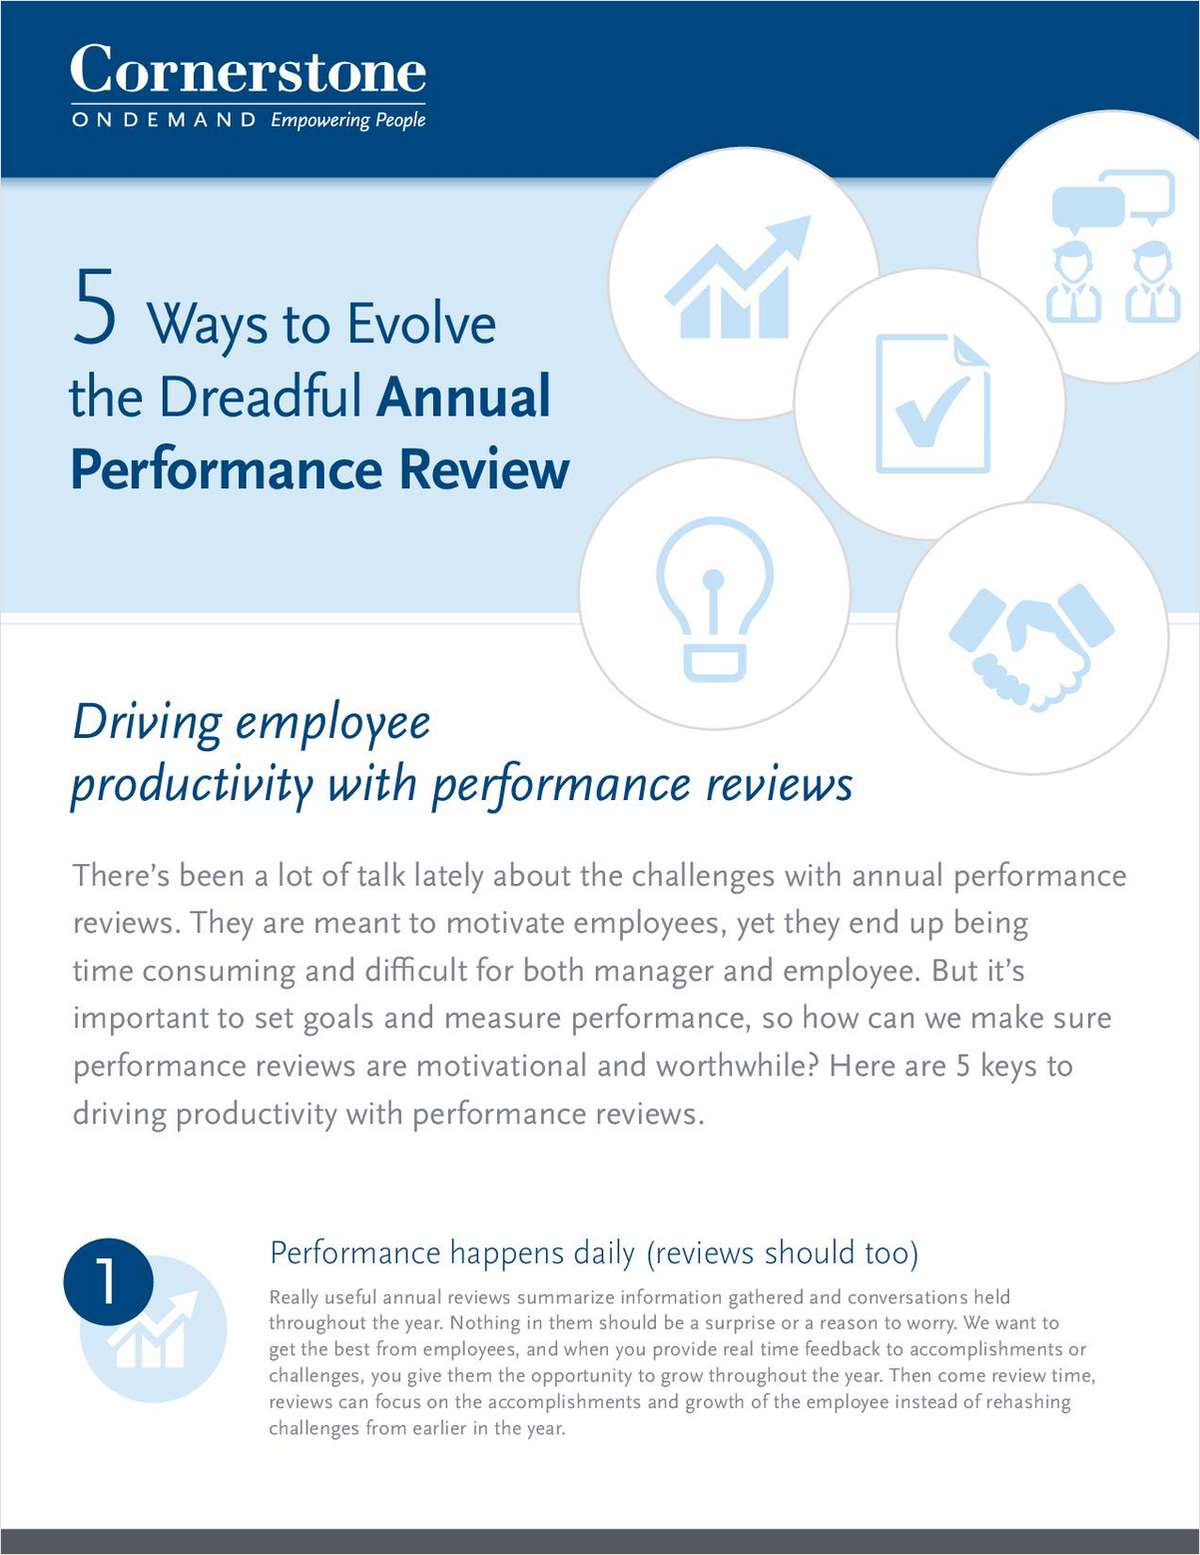 5 Ways to Evolve the Dreadful Annual Performance Review